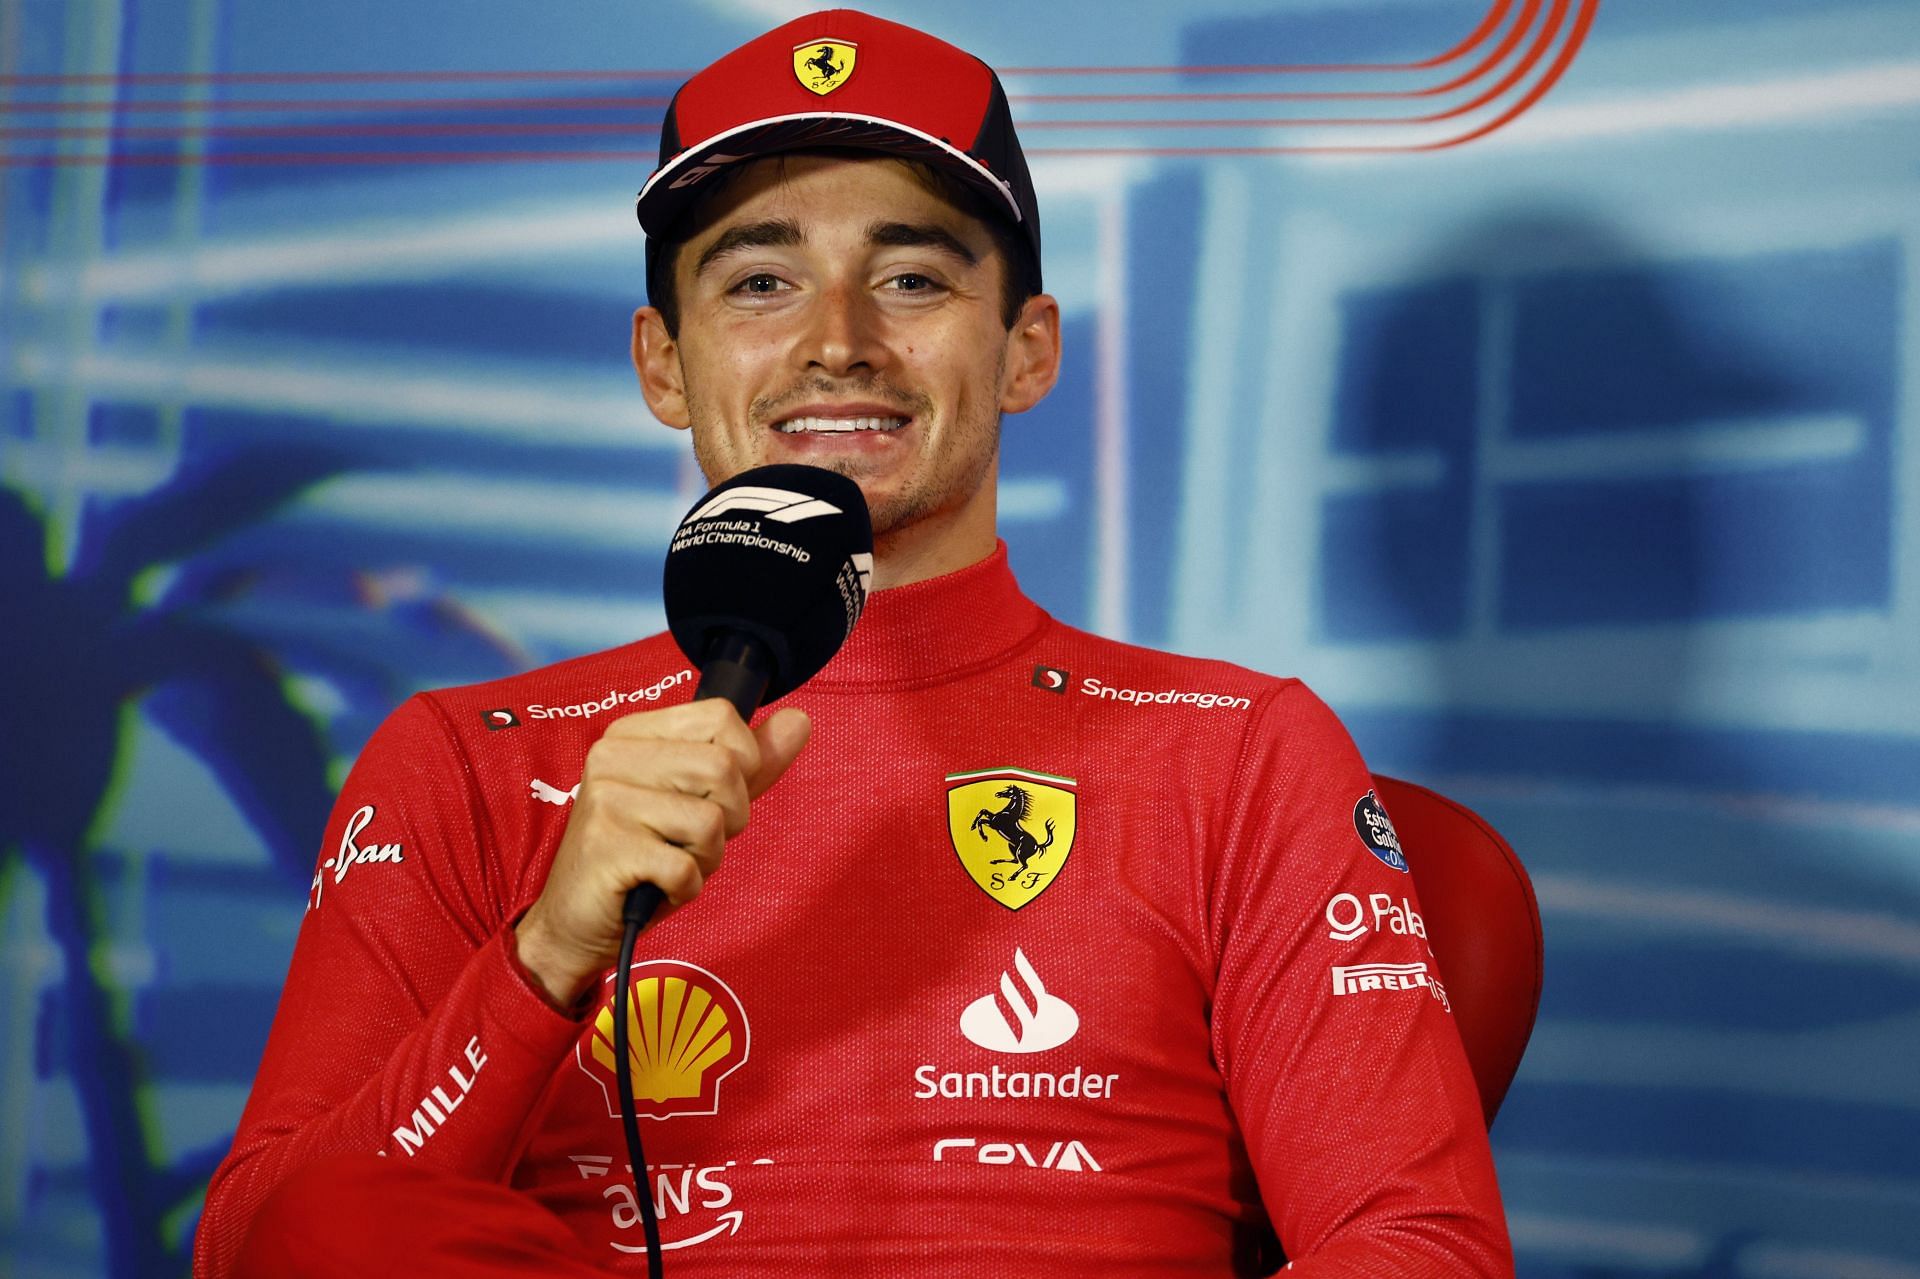 Second placed Charles Leclerc talks in the press conference after the F1 Grand Prix of Miami at the Miami International Autodrome on May 08, 2022 in Miami, Florida. (Photo by Jared C. Tilton/Getty Images)